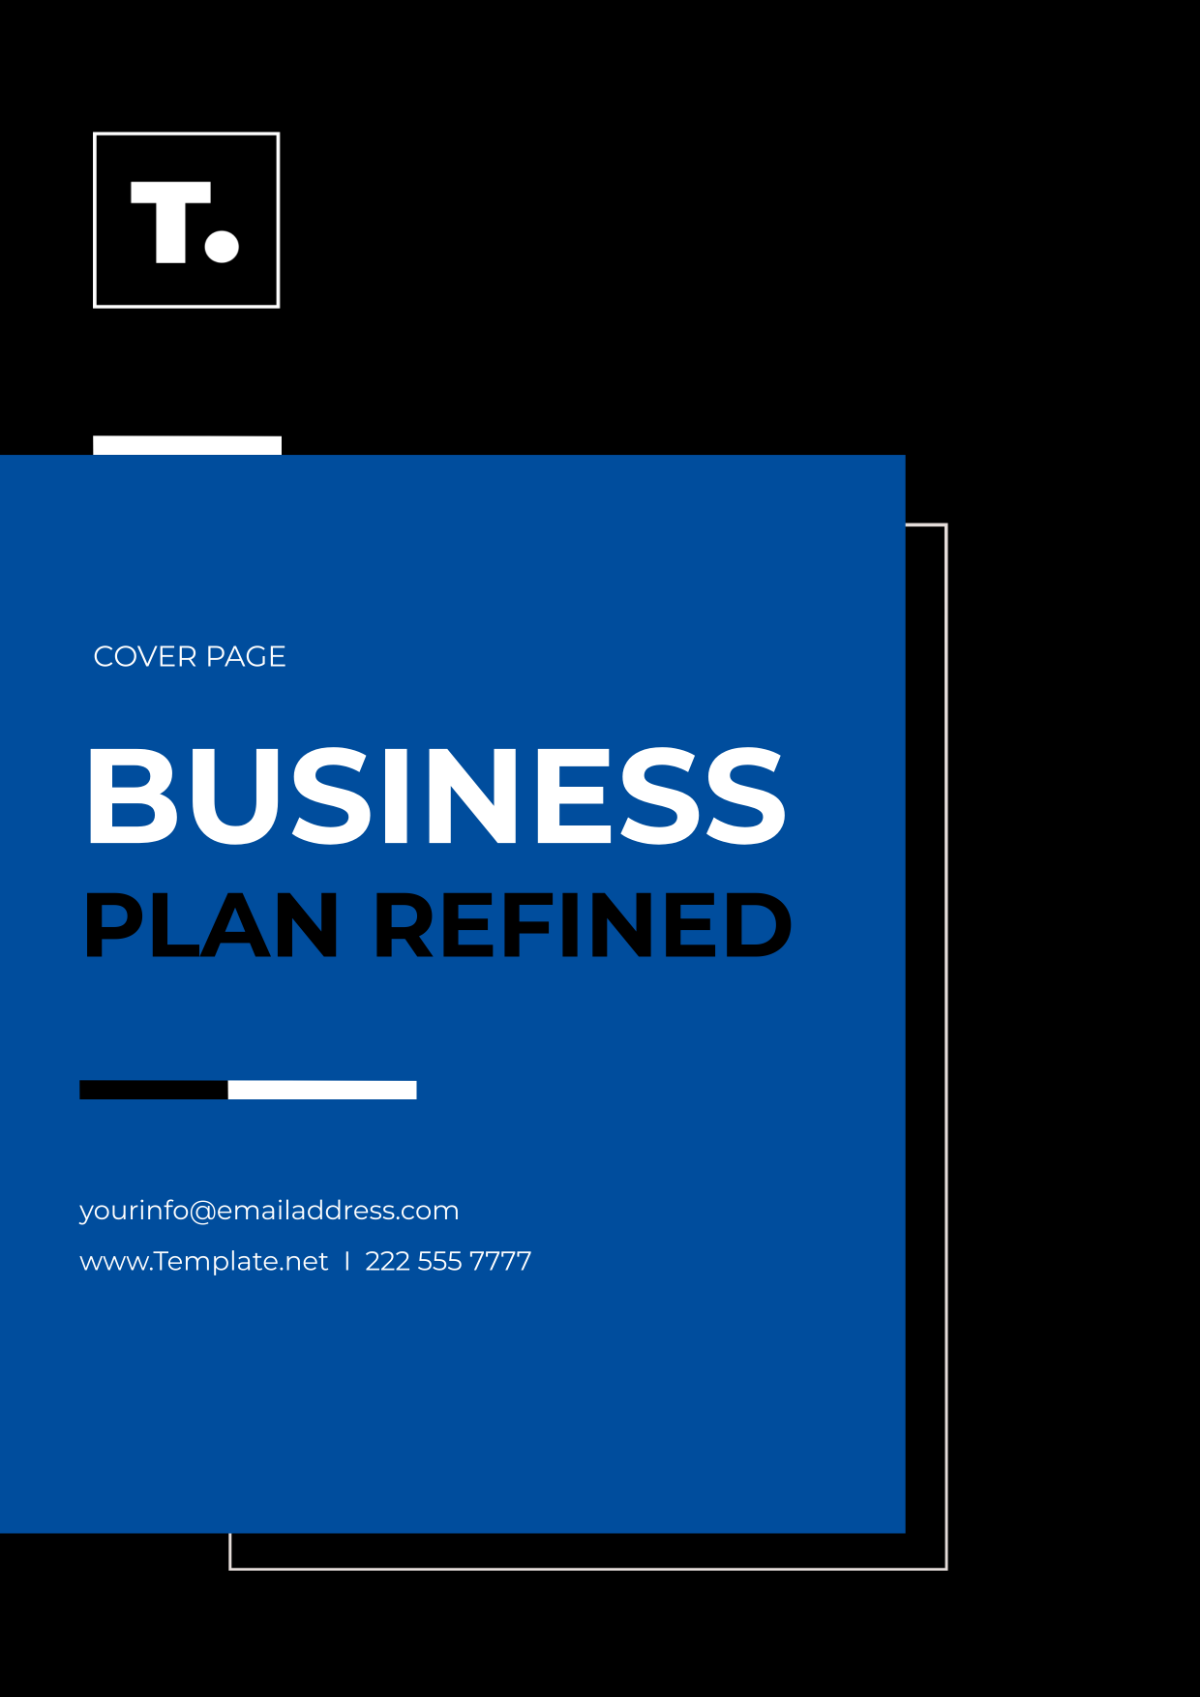 Business Plan Refined Cover Page Template